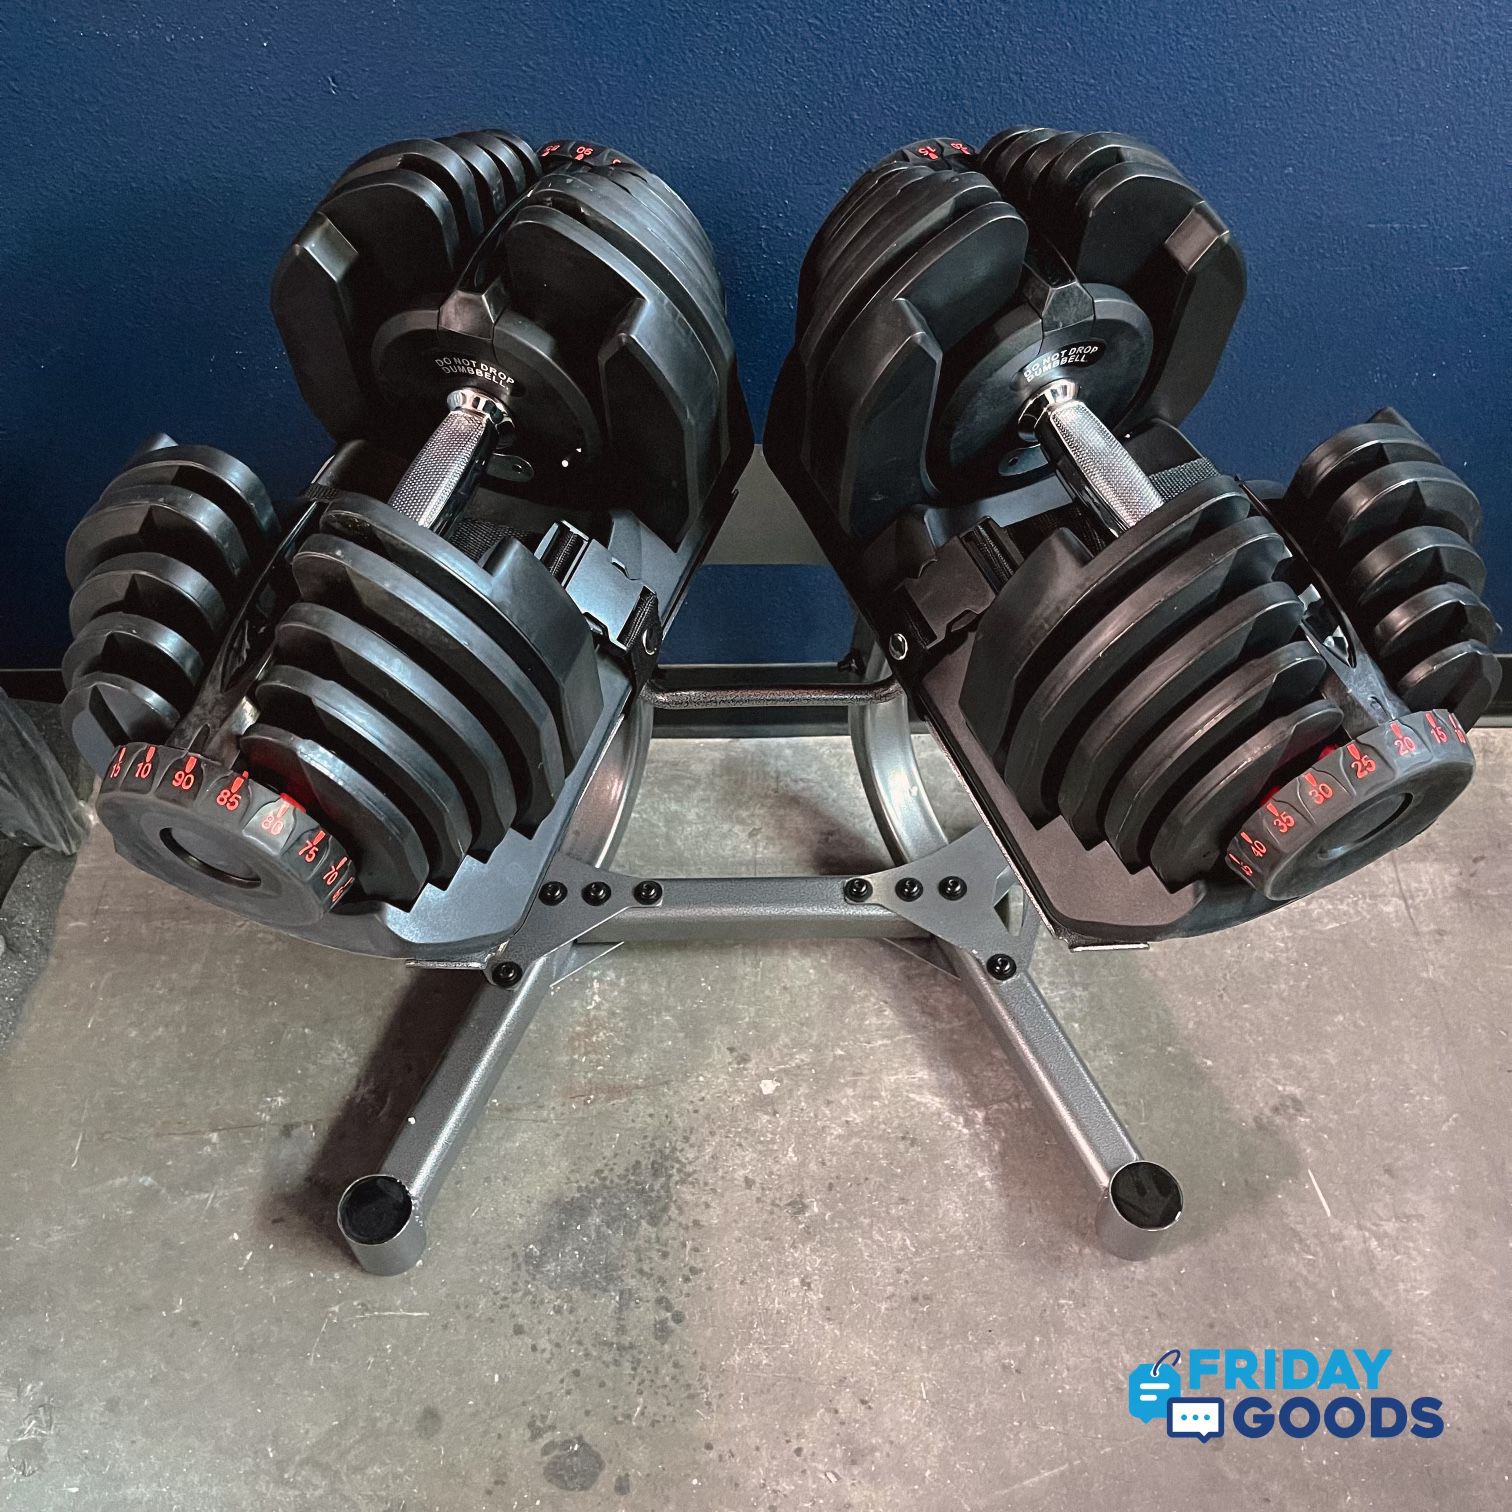 Brand New Pair 180 Lb (90x2) Adjustable Dumbbells + Stand Rack, Similar To Bowflex 1090 Gym Equipment (FREE DELIVERY )